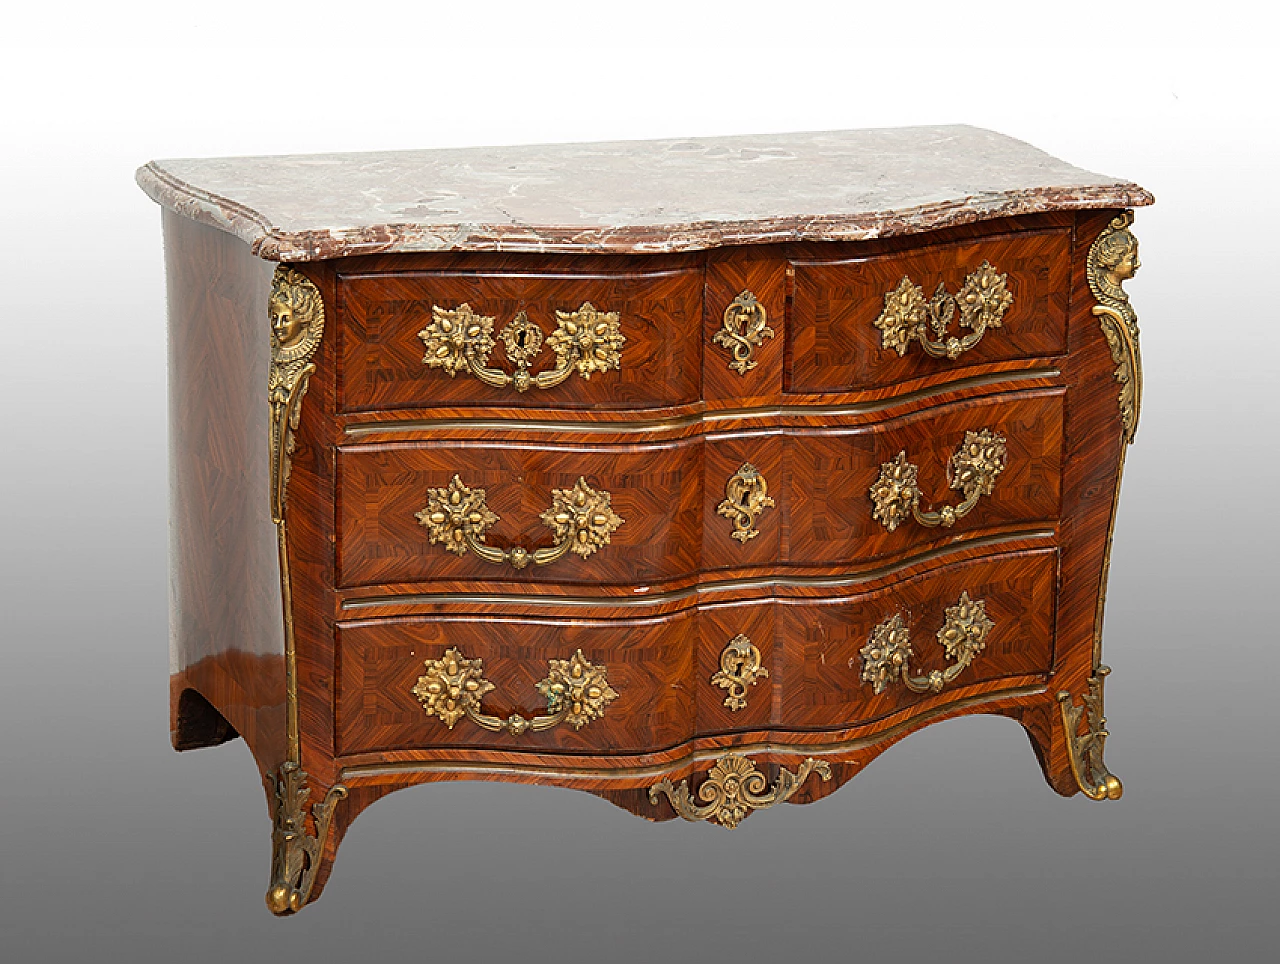 Tombeau chest of drawers in exotic wood with red France marble top, 18th century 1